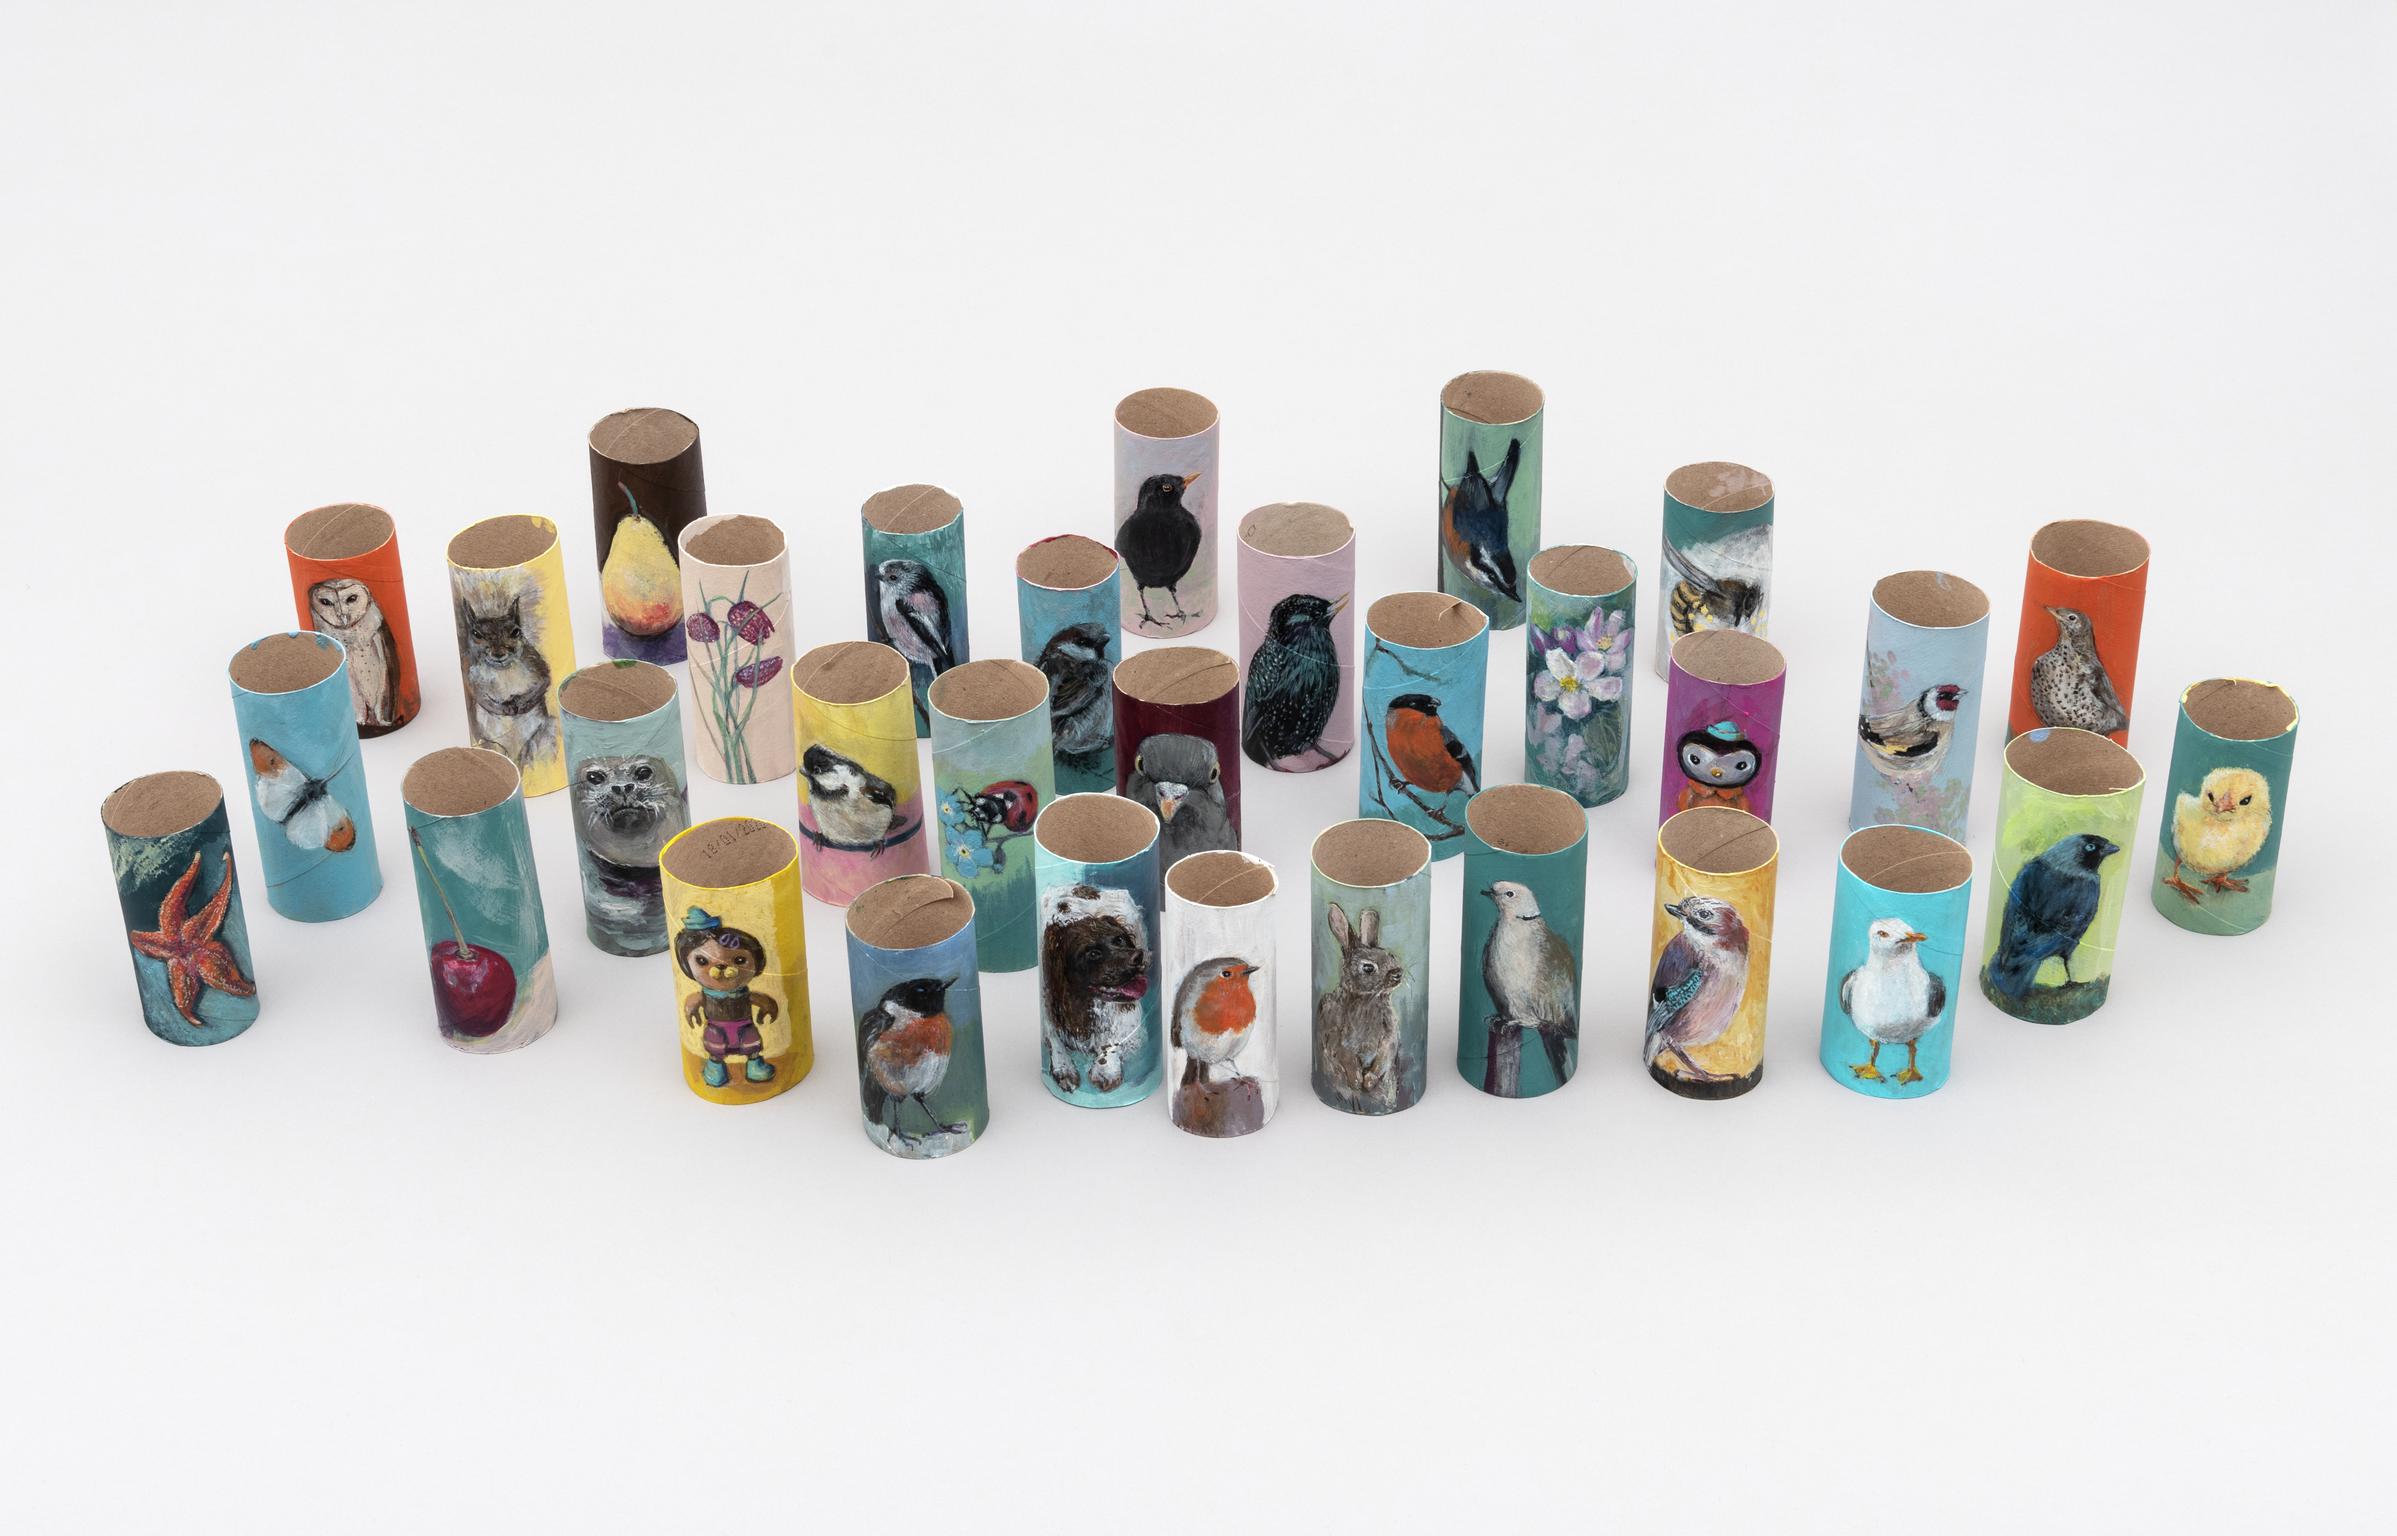 Group shot of Handpainted toilet roll by Carys Evans